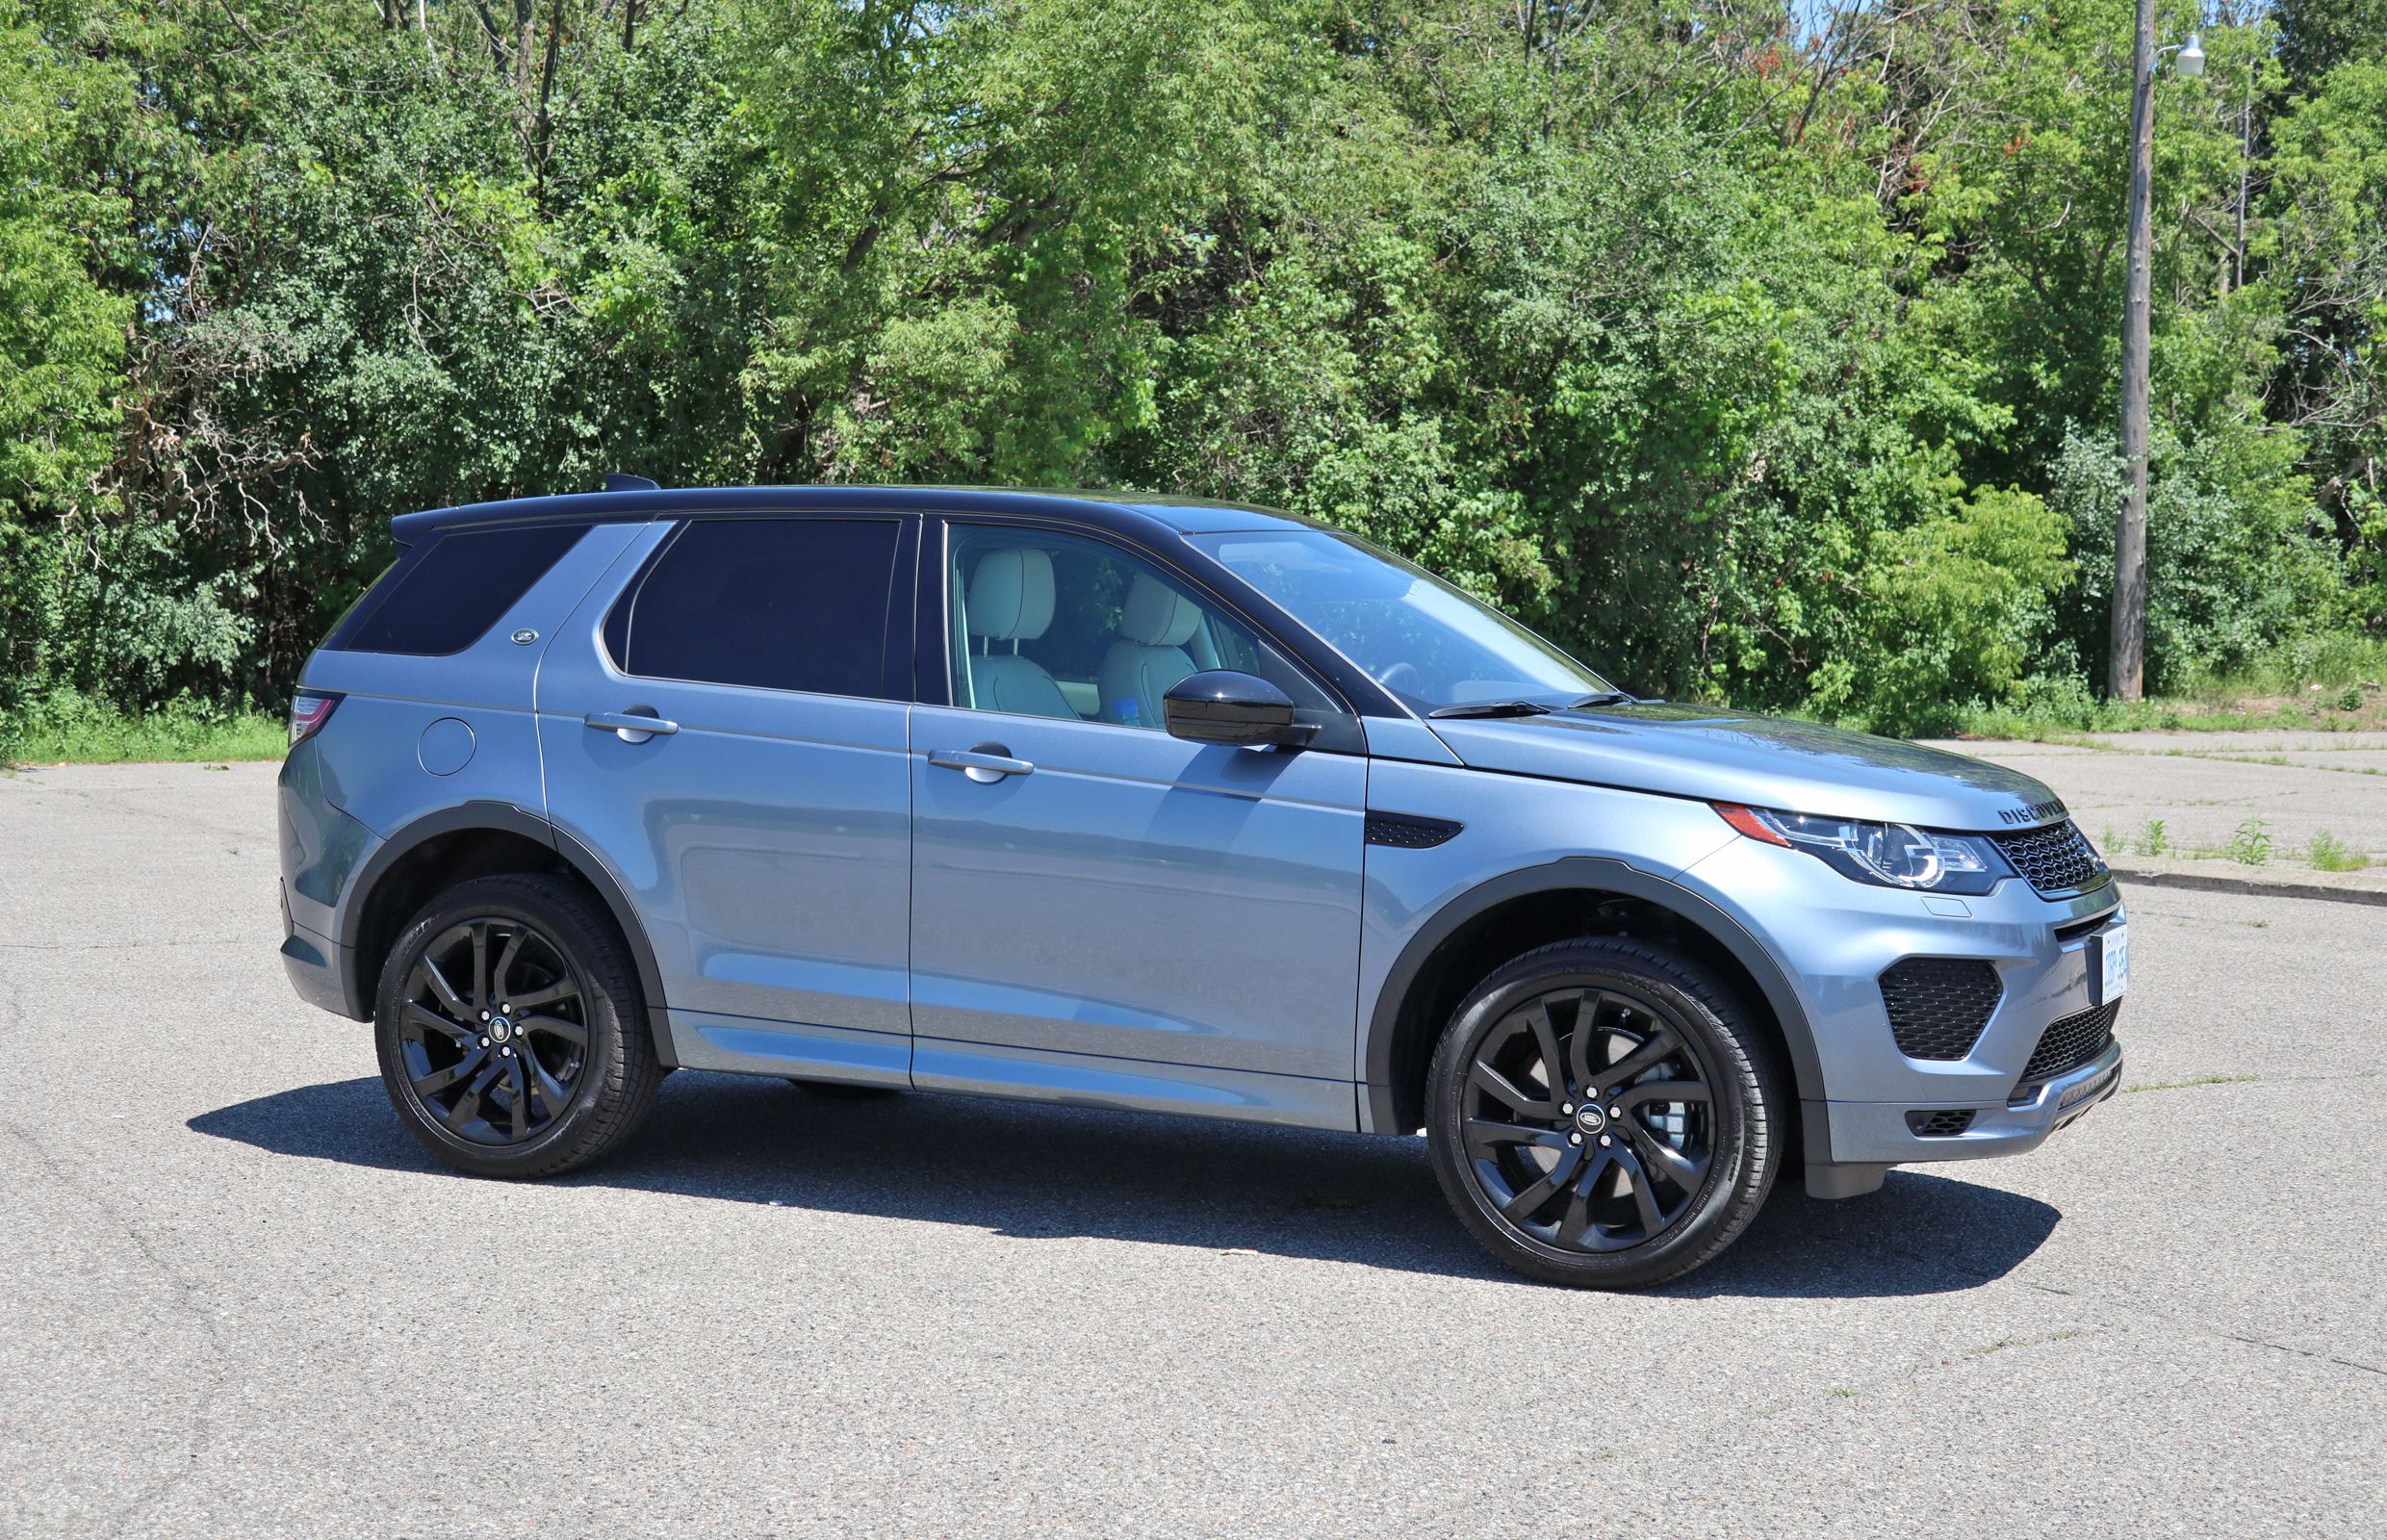 SUV Review: 2018 Land Rover Discovery Sport